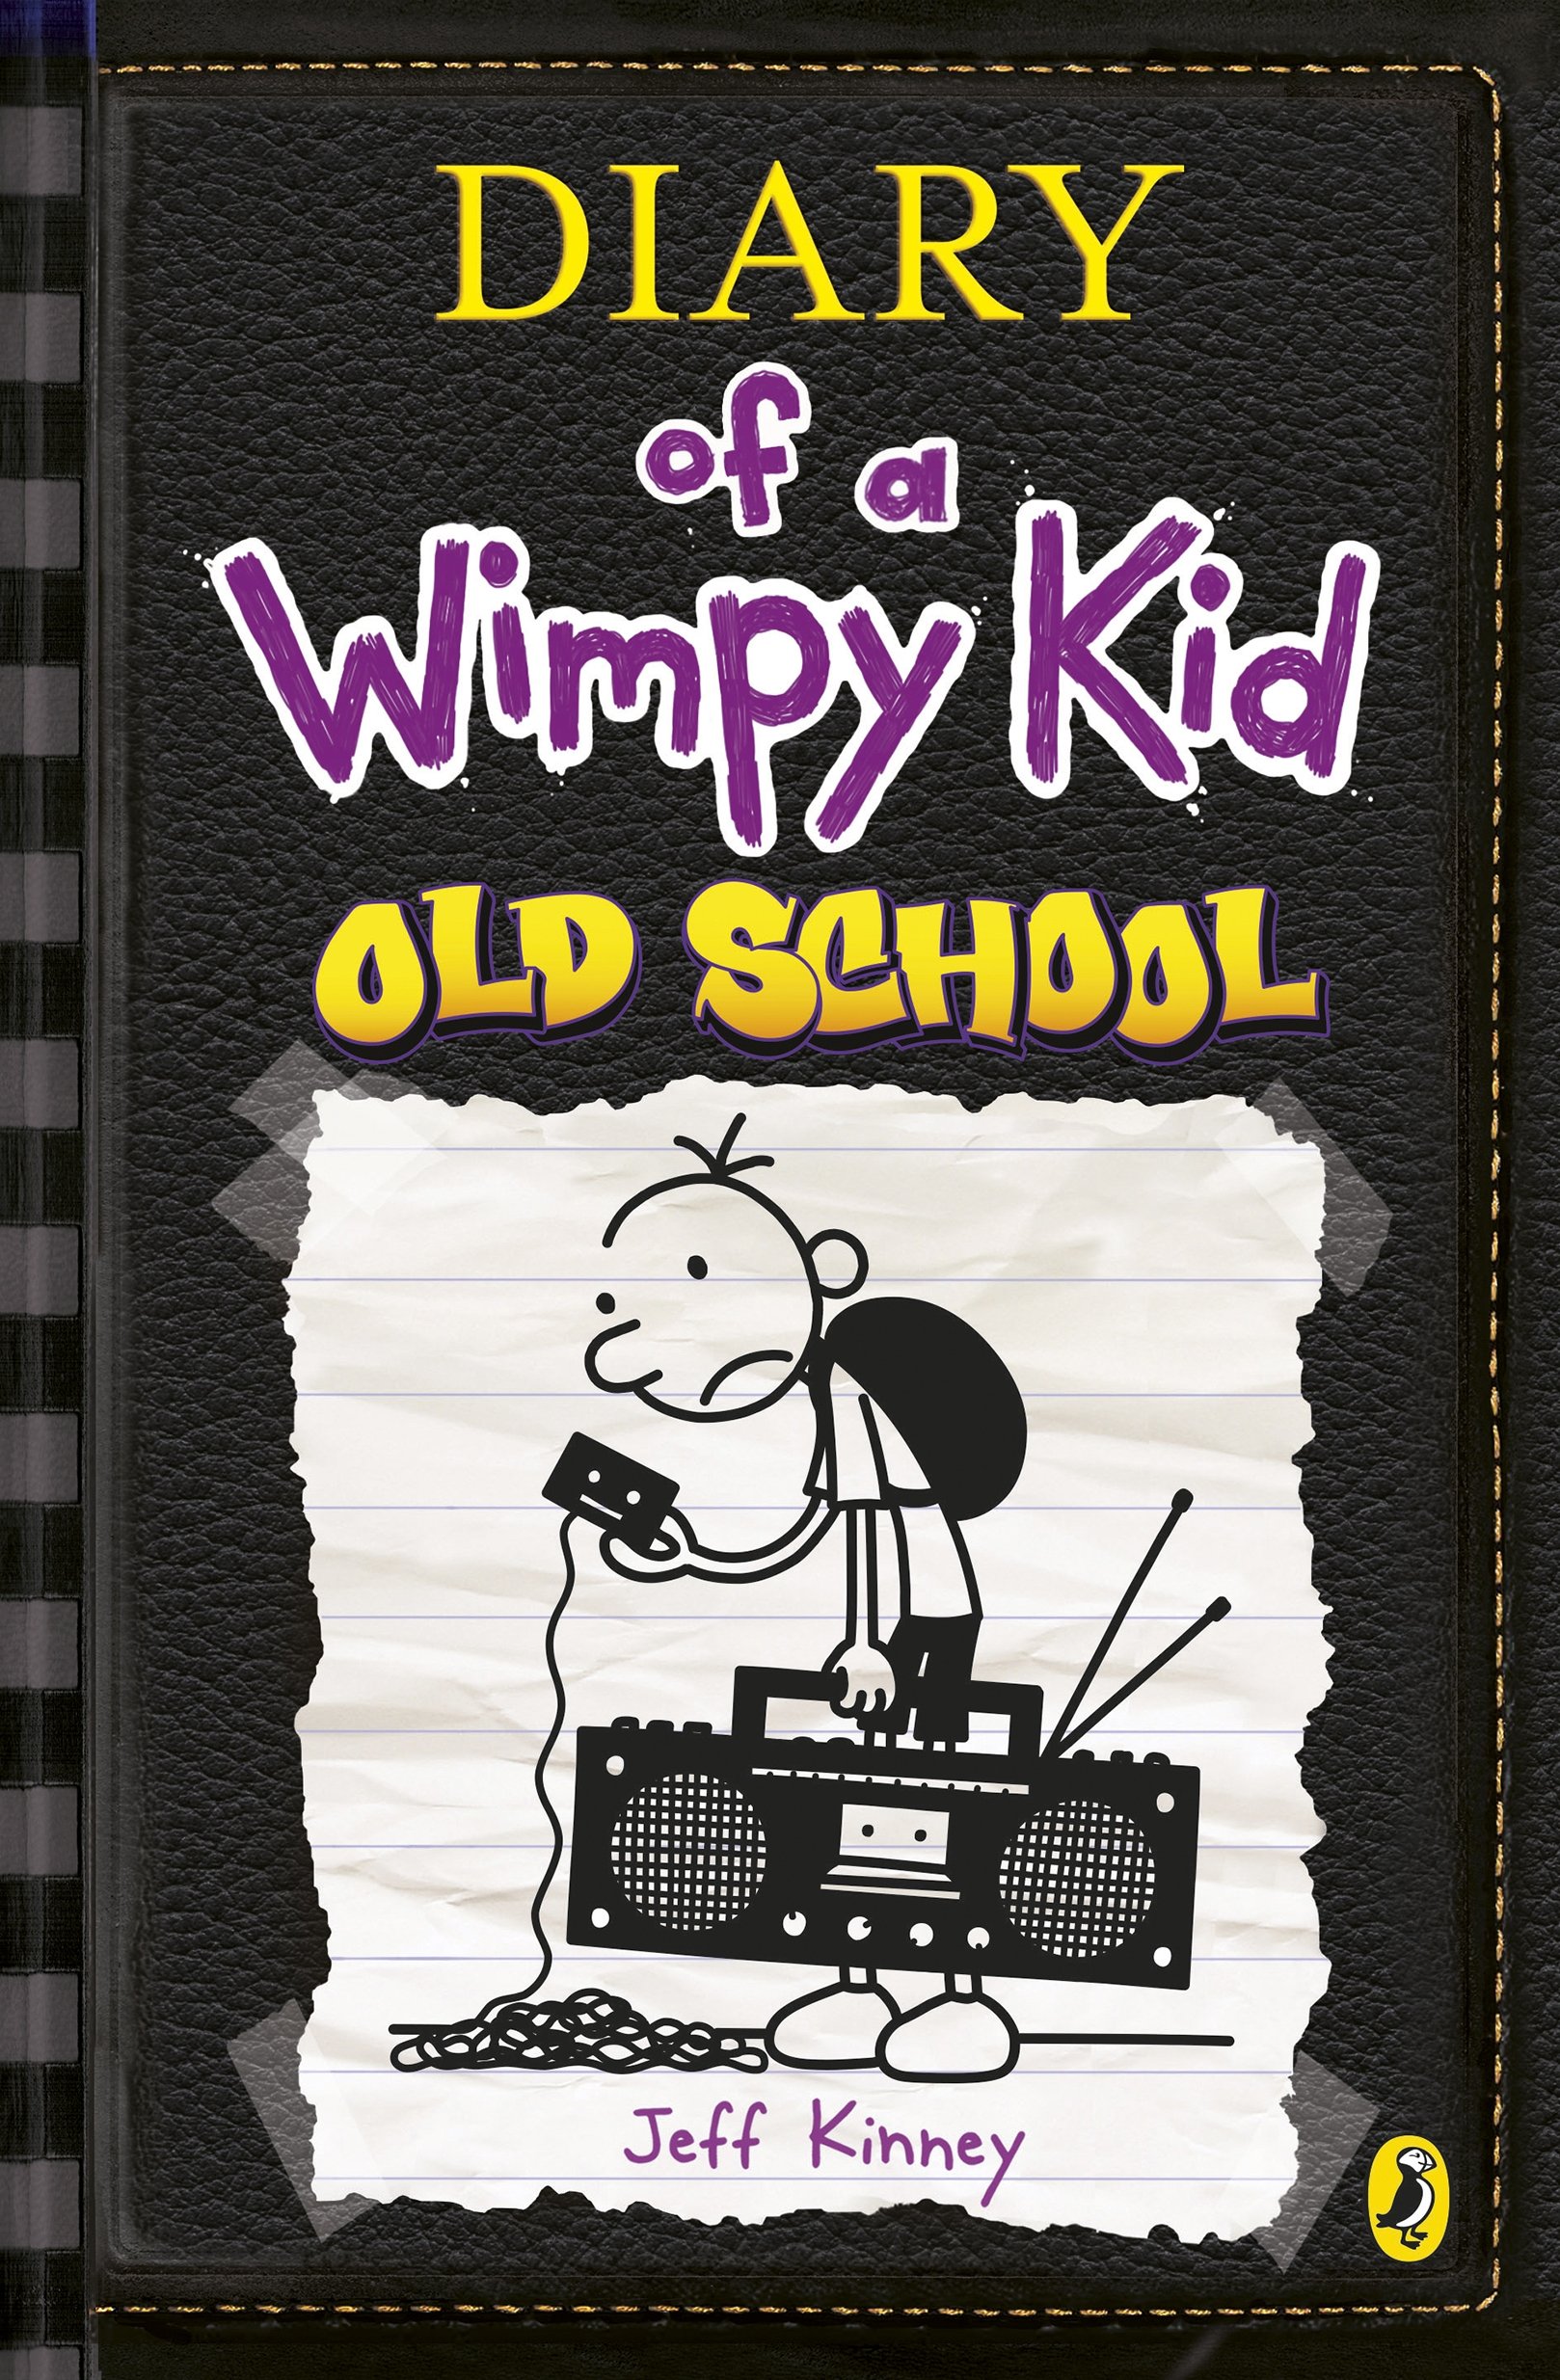 Diary of a Wimpy Kid- Old School